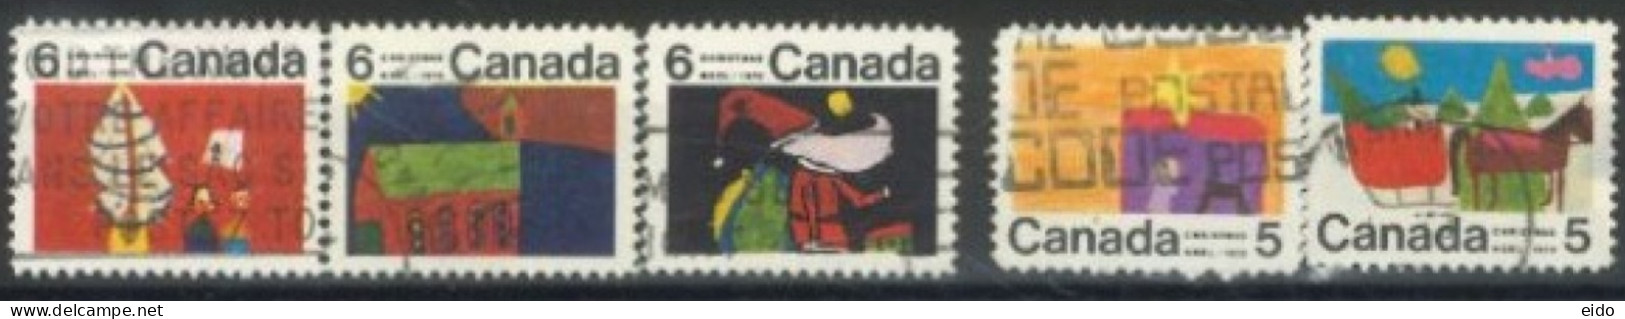 CANADA - 1970, CHRISTMAS STAMPS SET OF 5, USED. - Oblitérés